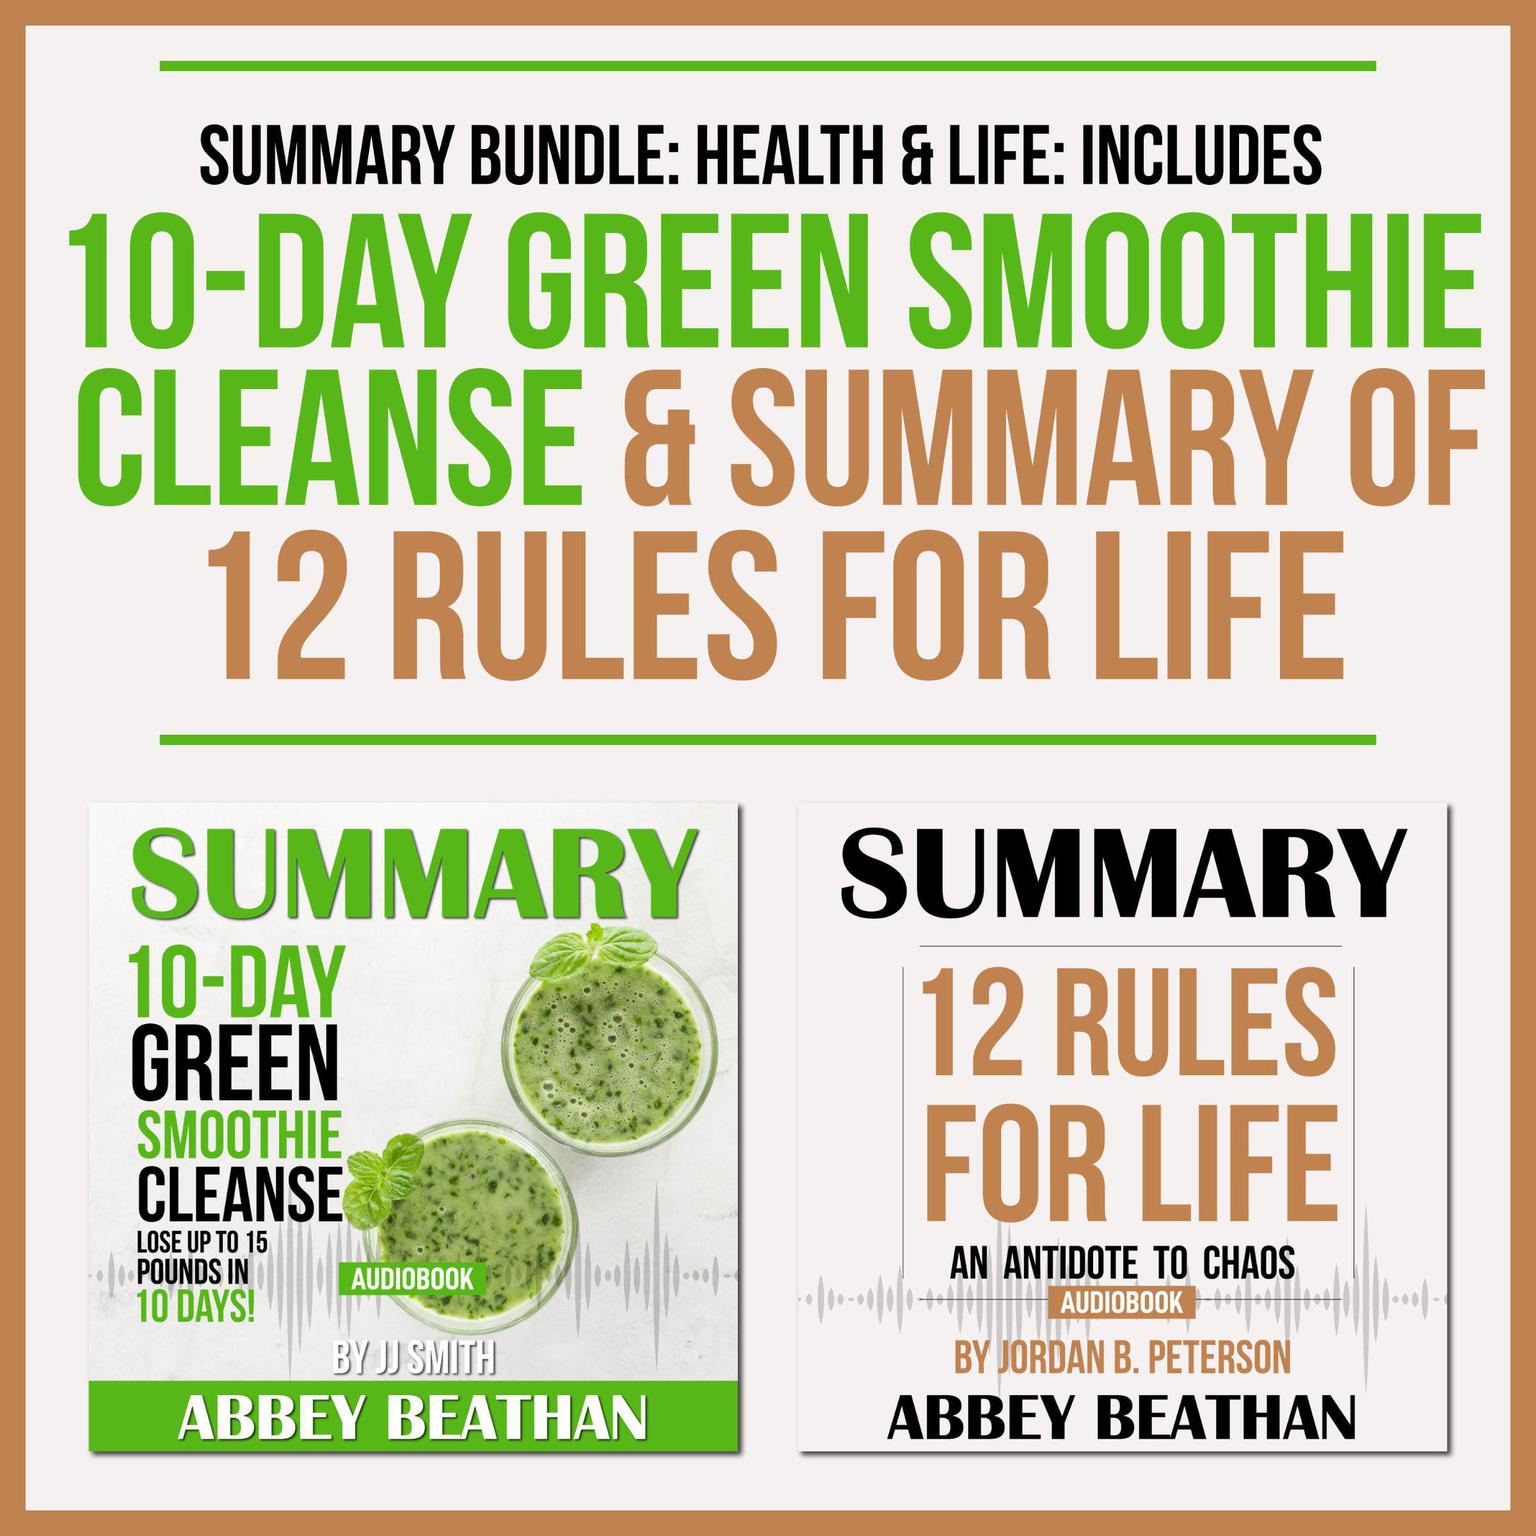 Summary Bundle: Health & Life: Includes Summary of 10-Day Green Smoothie Cleanse & Summary of 12 Rules for Life Audiobook, by Abbey Beathan